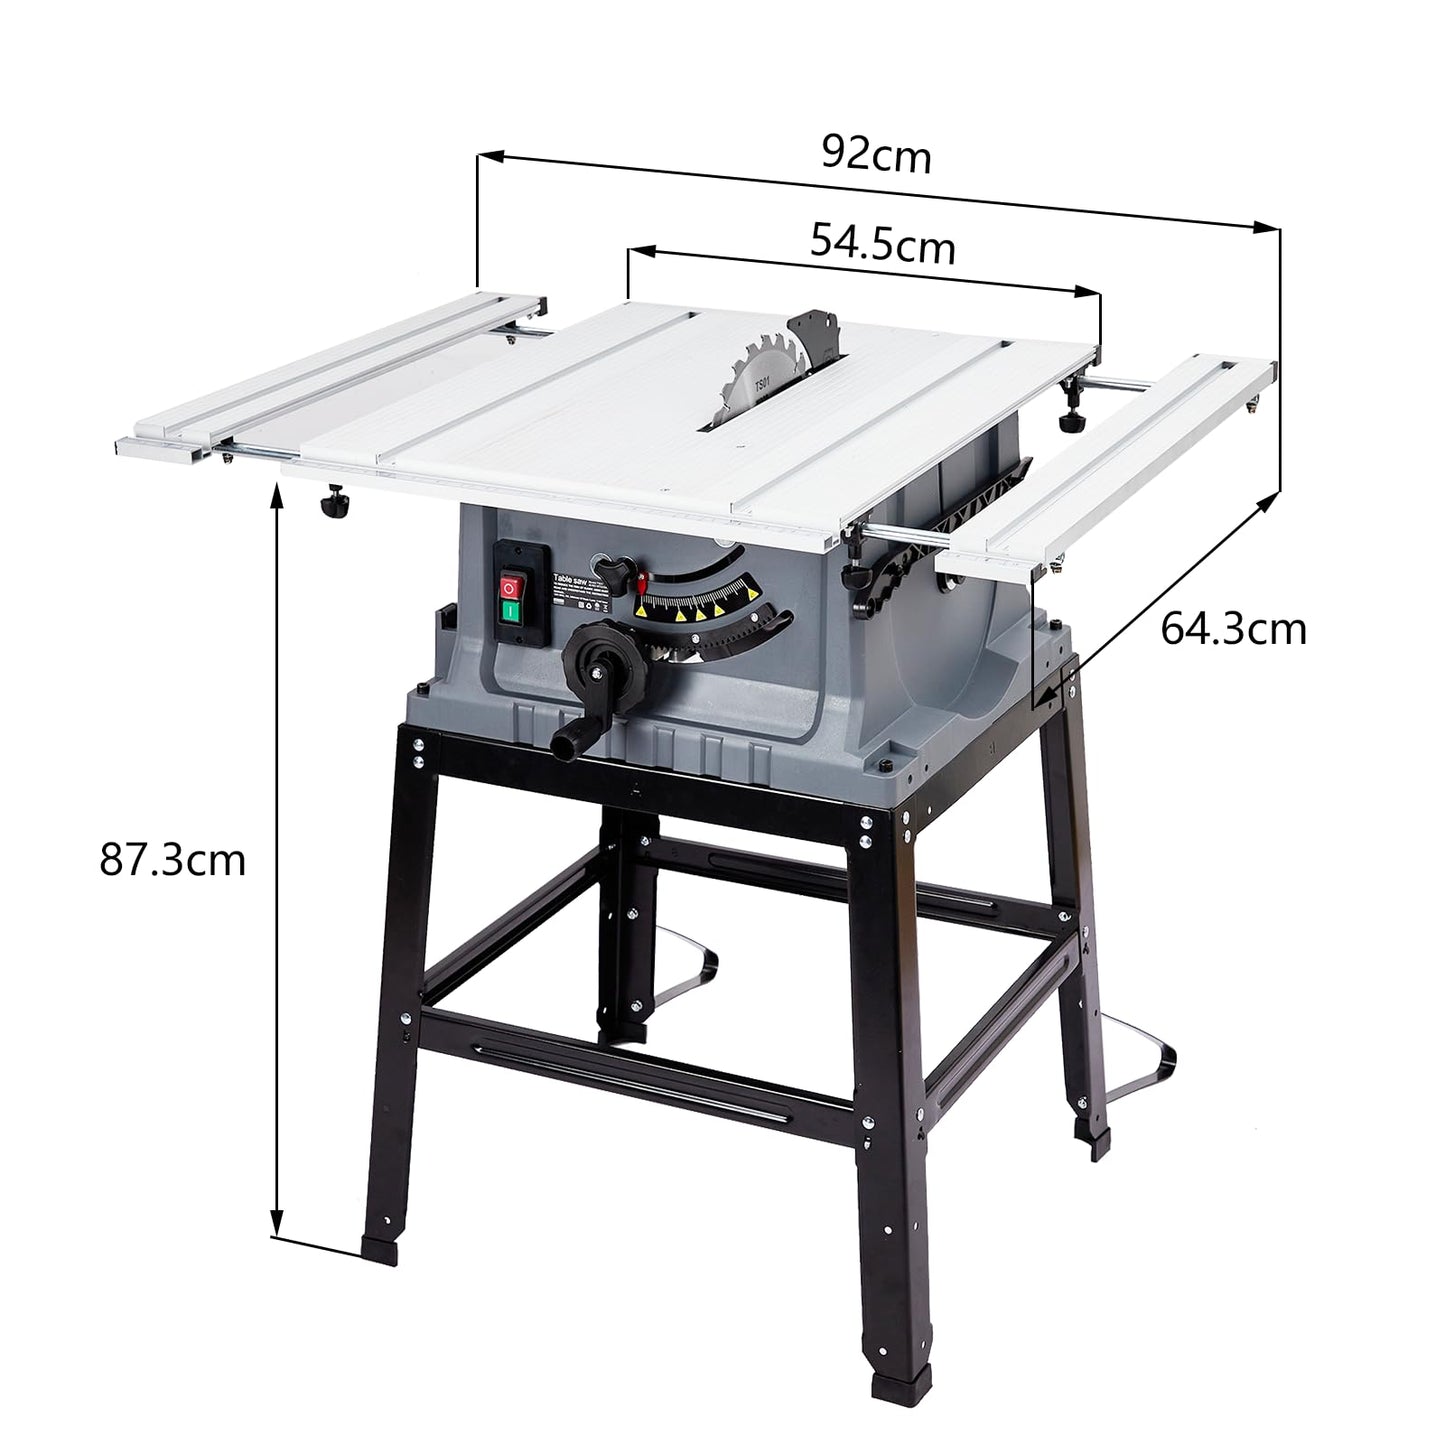 Table Saw, Towallmark 10 Inch 15A Multifunctional Saw with Stand & Push Stick, 90° Cross Cut & 0-45° Bevel Cut, 5000RPM, Adjustable Blade Height for